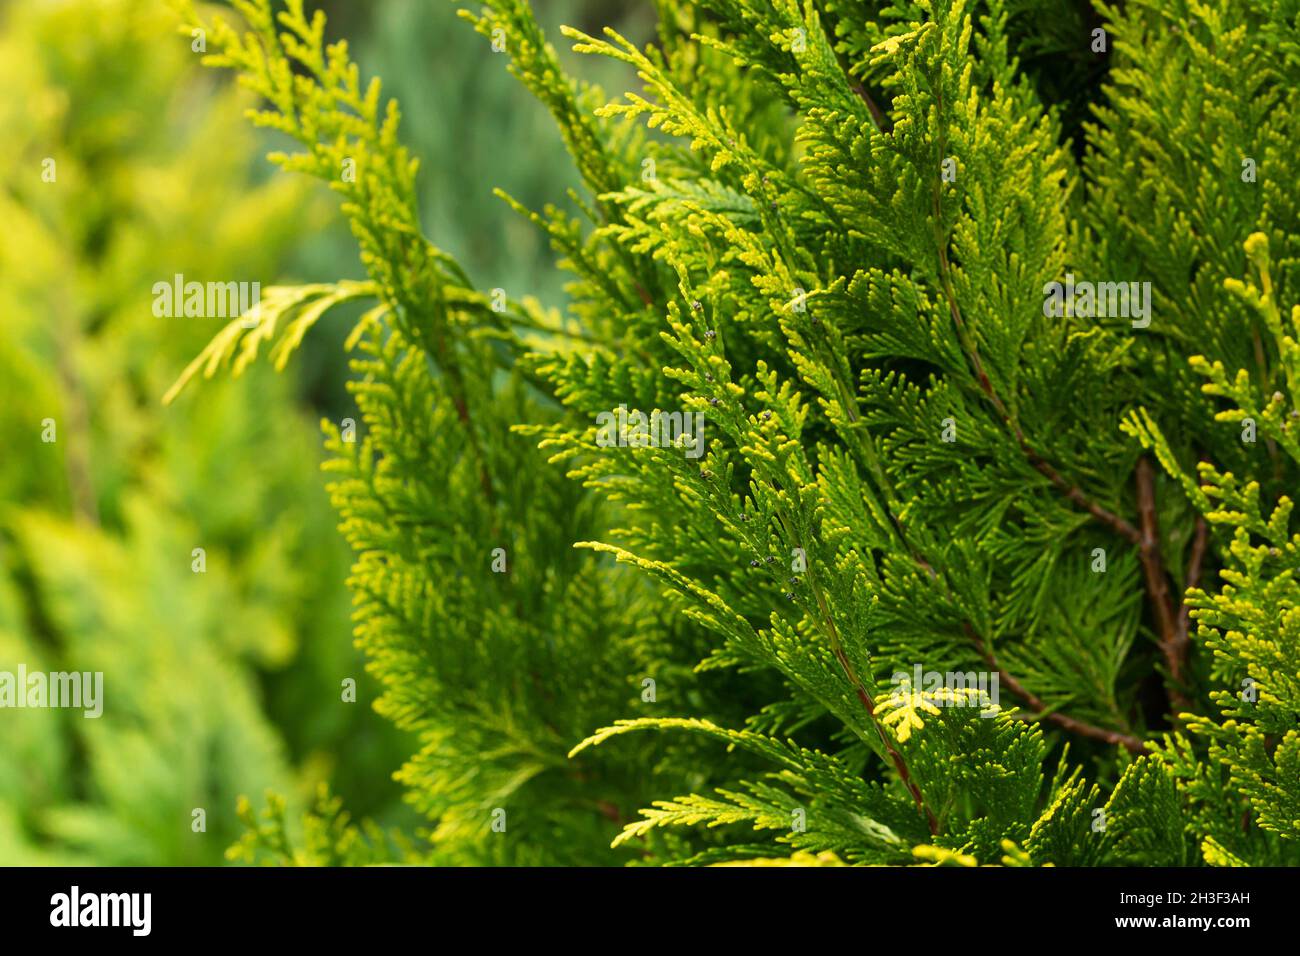 Evergreen green thuja hedge close-up. Thuja hedgerow texture and nature background Stock Photo